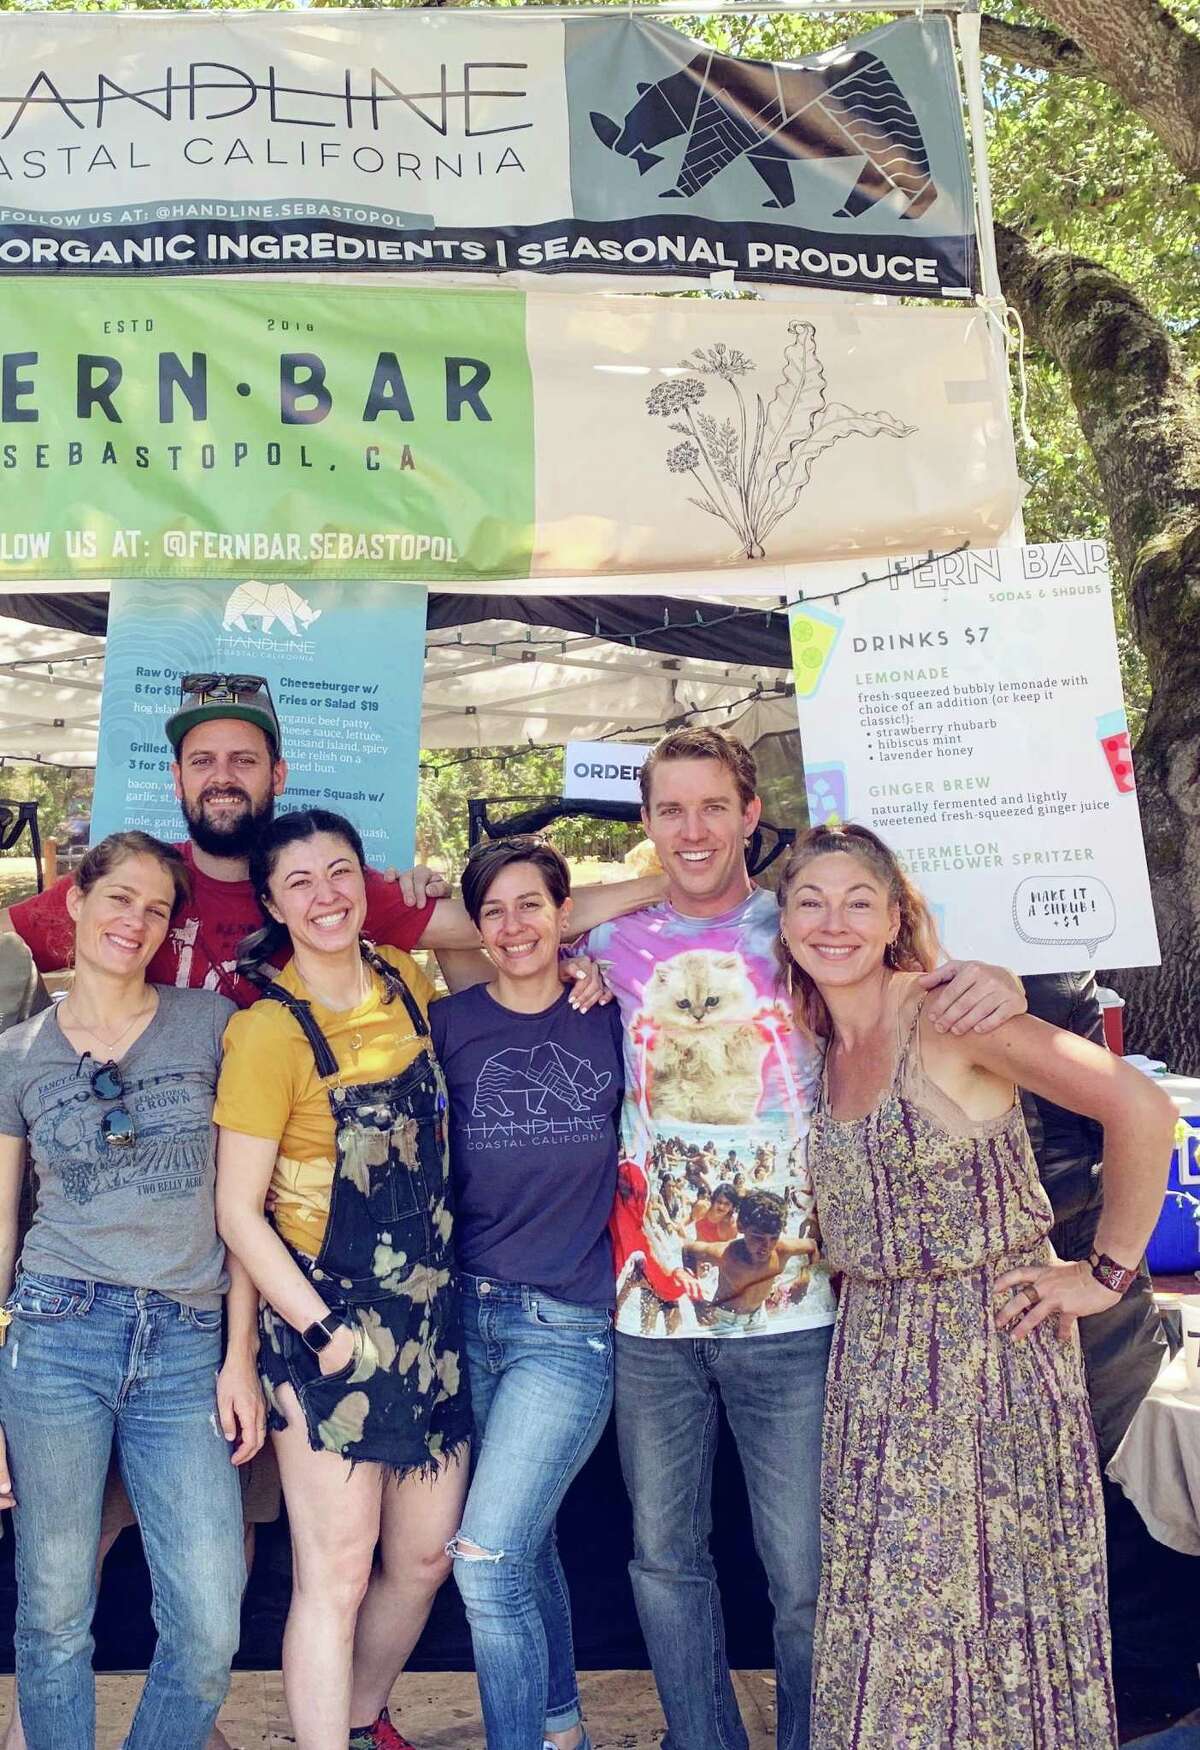 Fern Bar and Handline owners and staffers Natalie Goble (left), Lowell Sheldon, Jesse Hom-Dawson, Leah Engel, Sam Levy and Gia Baiocchi at an event promoting the restaurants.